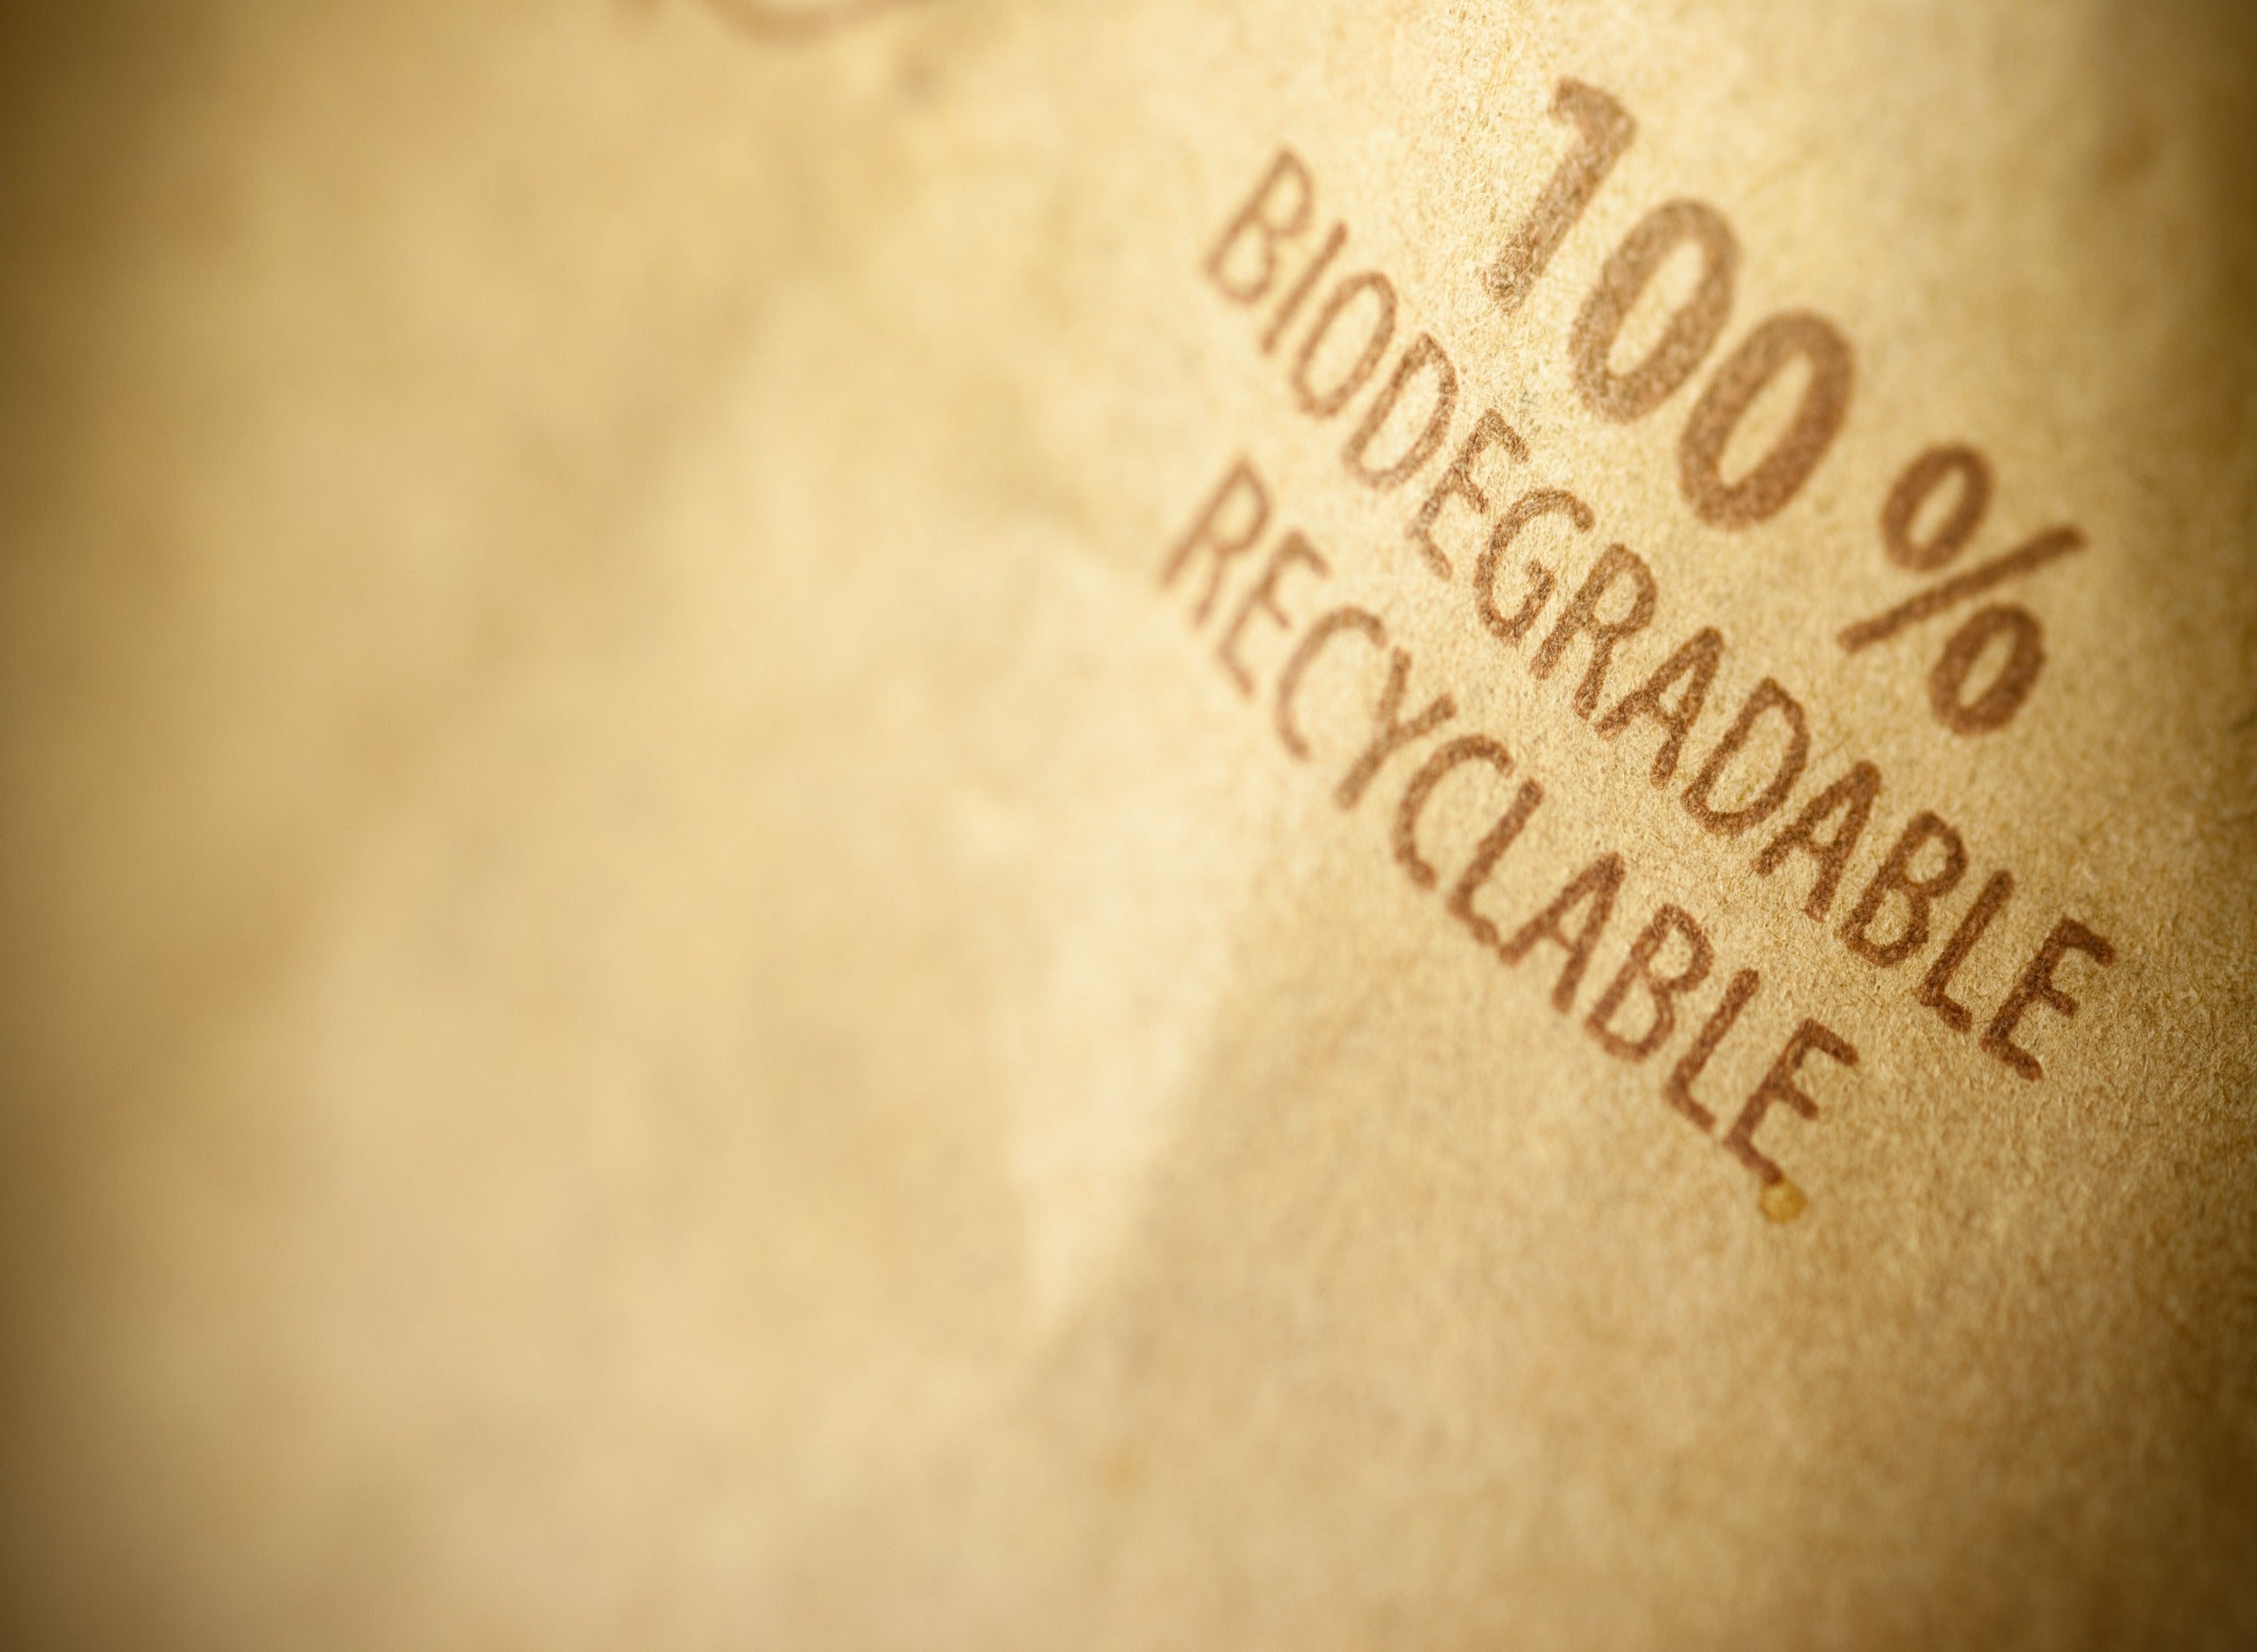 Biodegradable Packaging: The New Standard for Eco-conscious Brands